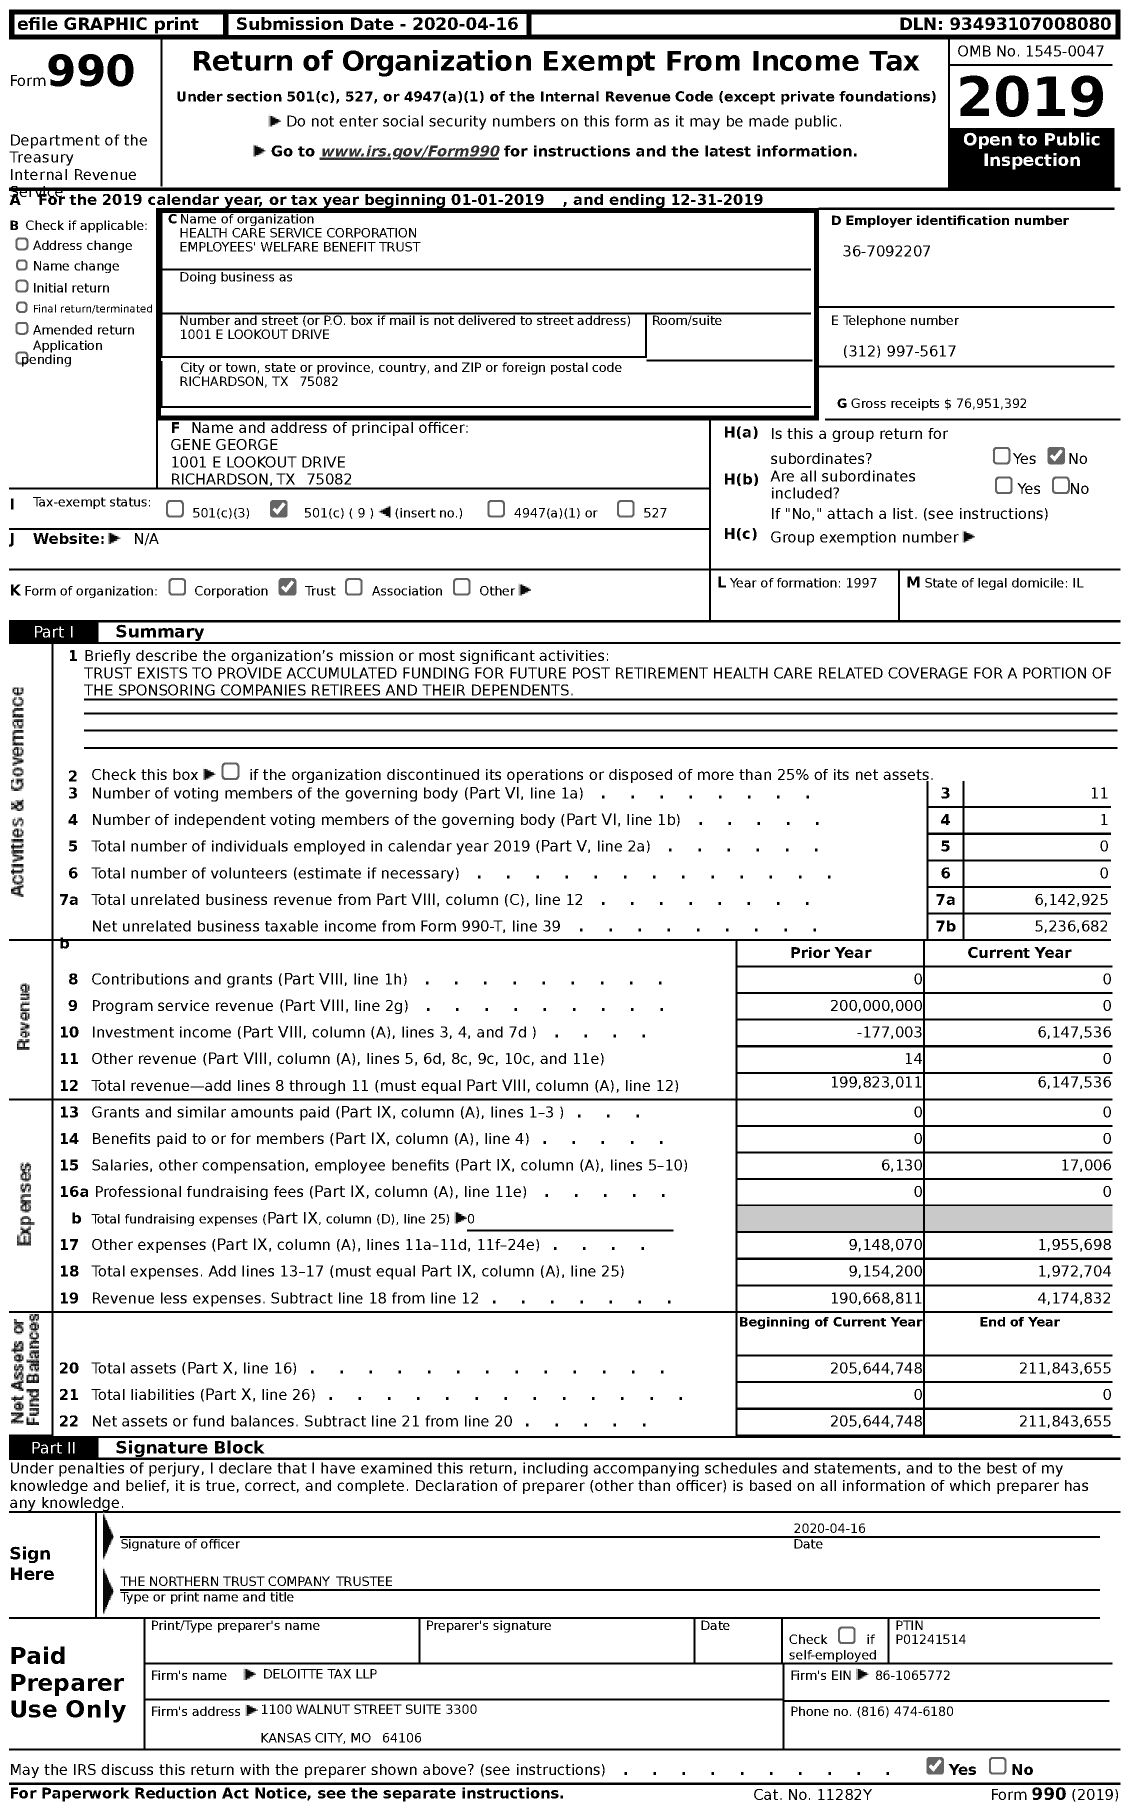 Image of first page of 2019 Form 990 for Health Care Service Corporation Employees' Welfare Benefit Trust